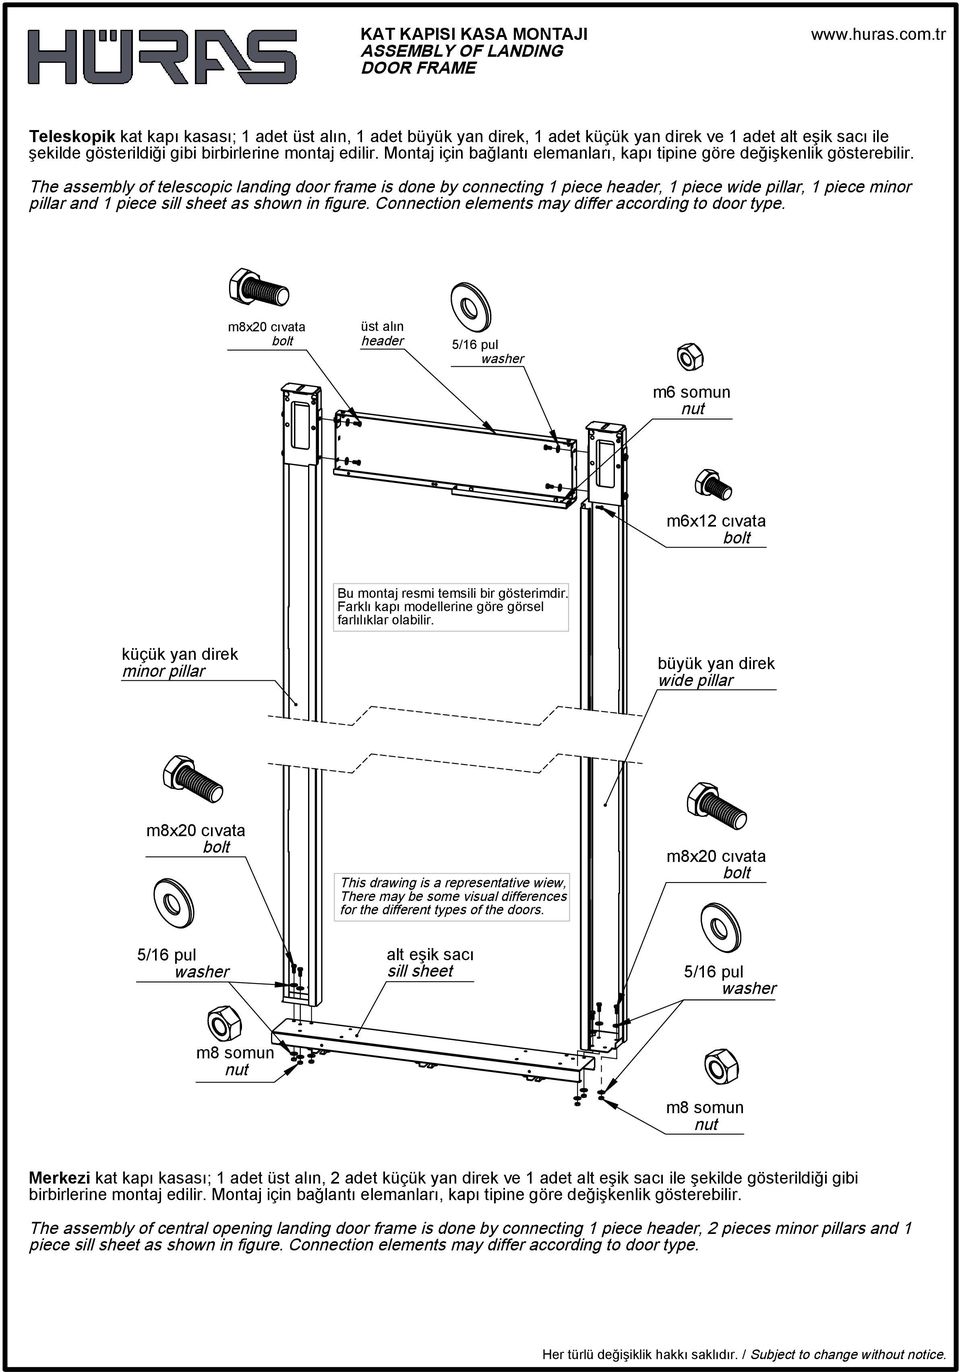 The assembly of telescopic landing door frame is done by connecting 1 piece header, 1 piece wide pillar, 1 piece minor pillar and 1 piece sill sheet as shown in figure.